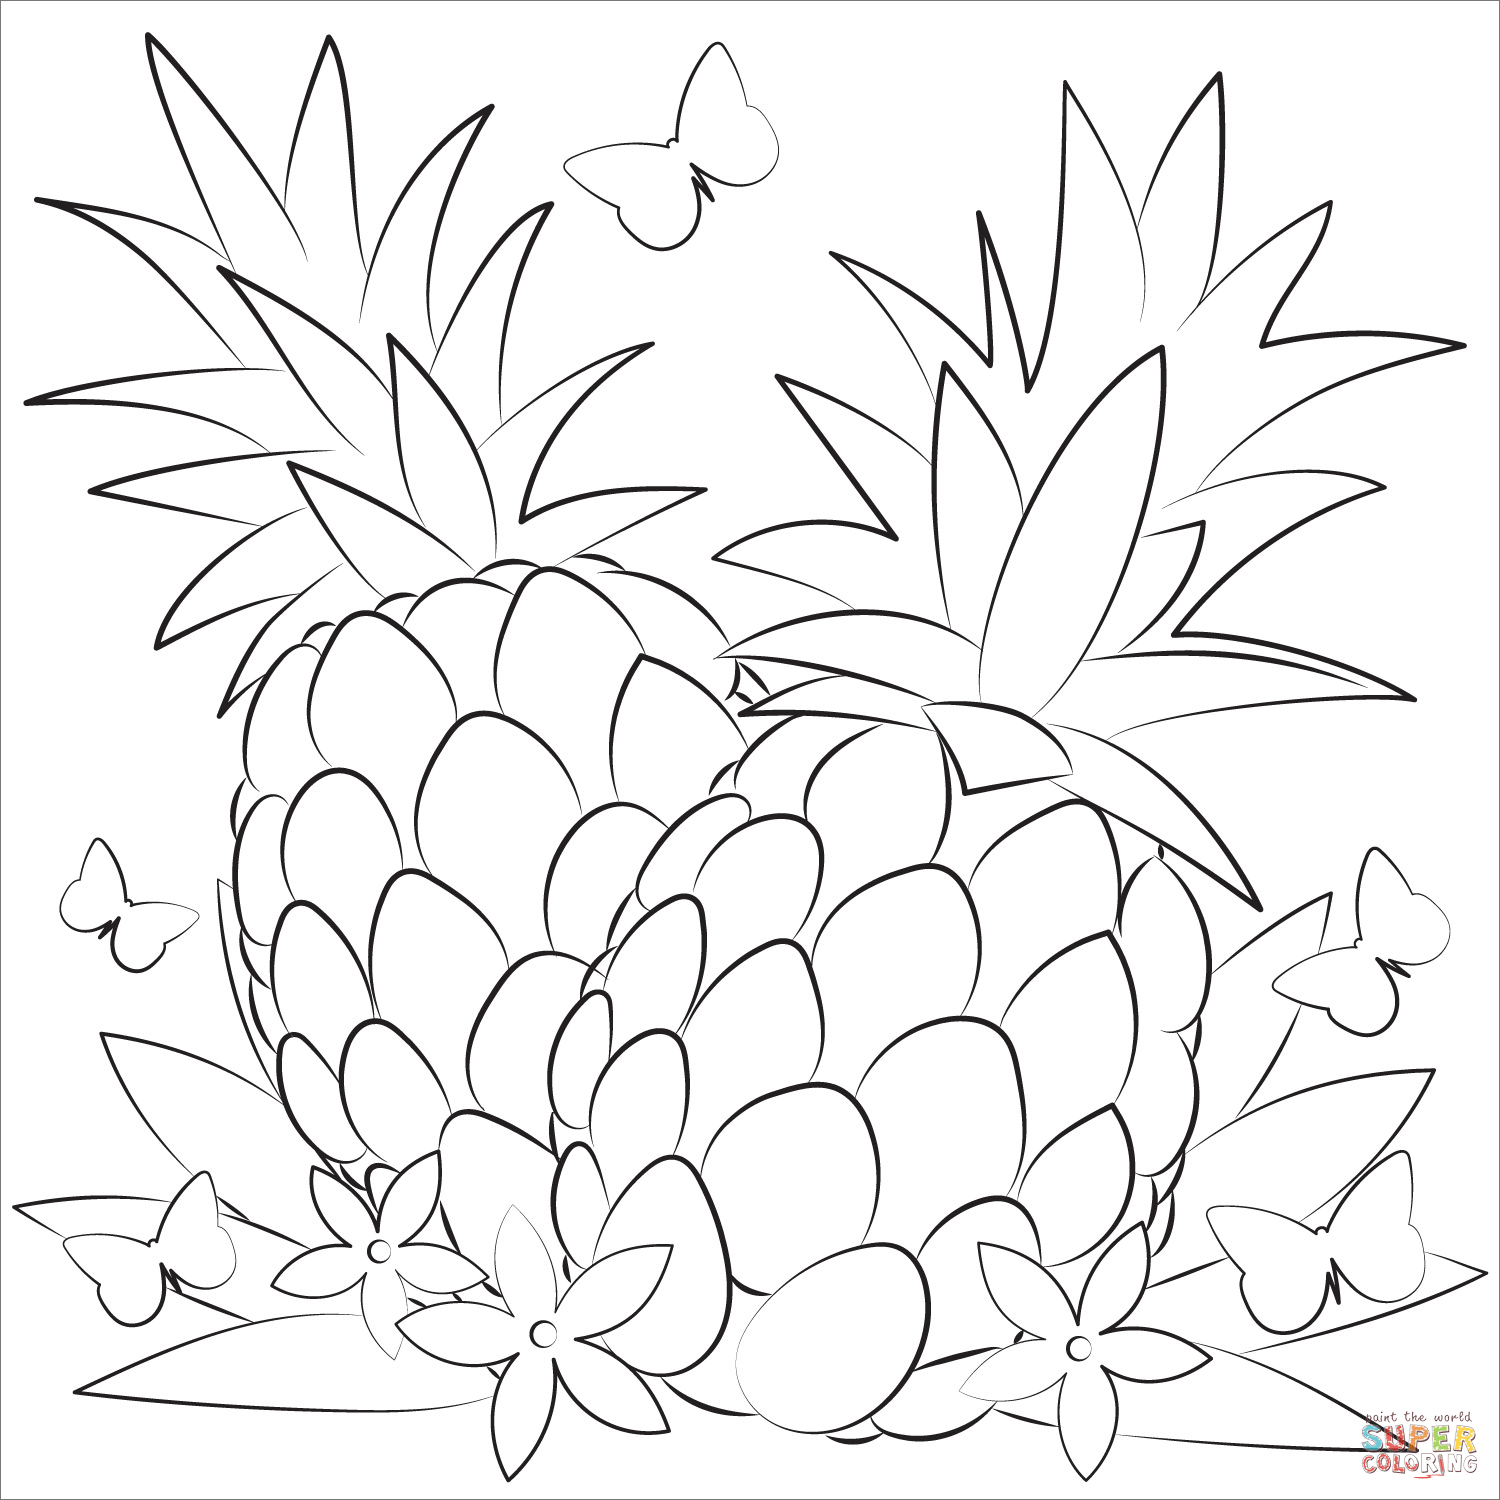 Pineapple coloring page free printable coloring pages